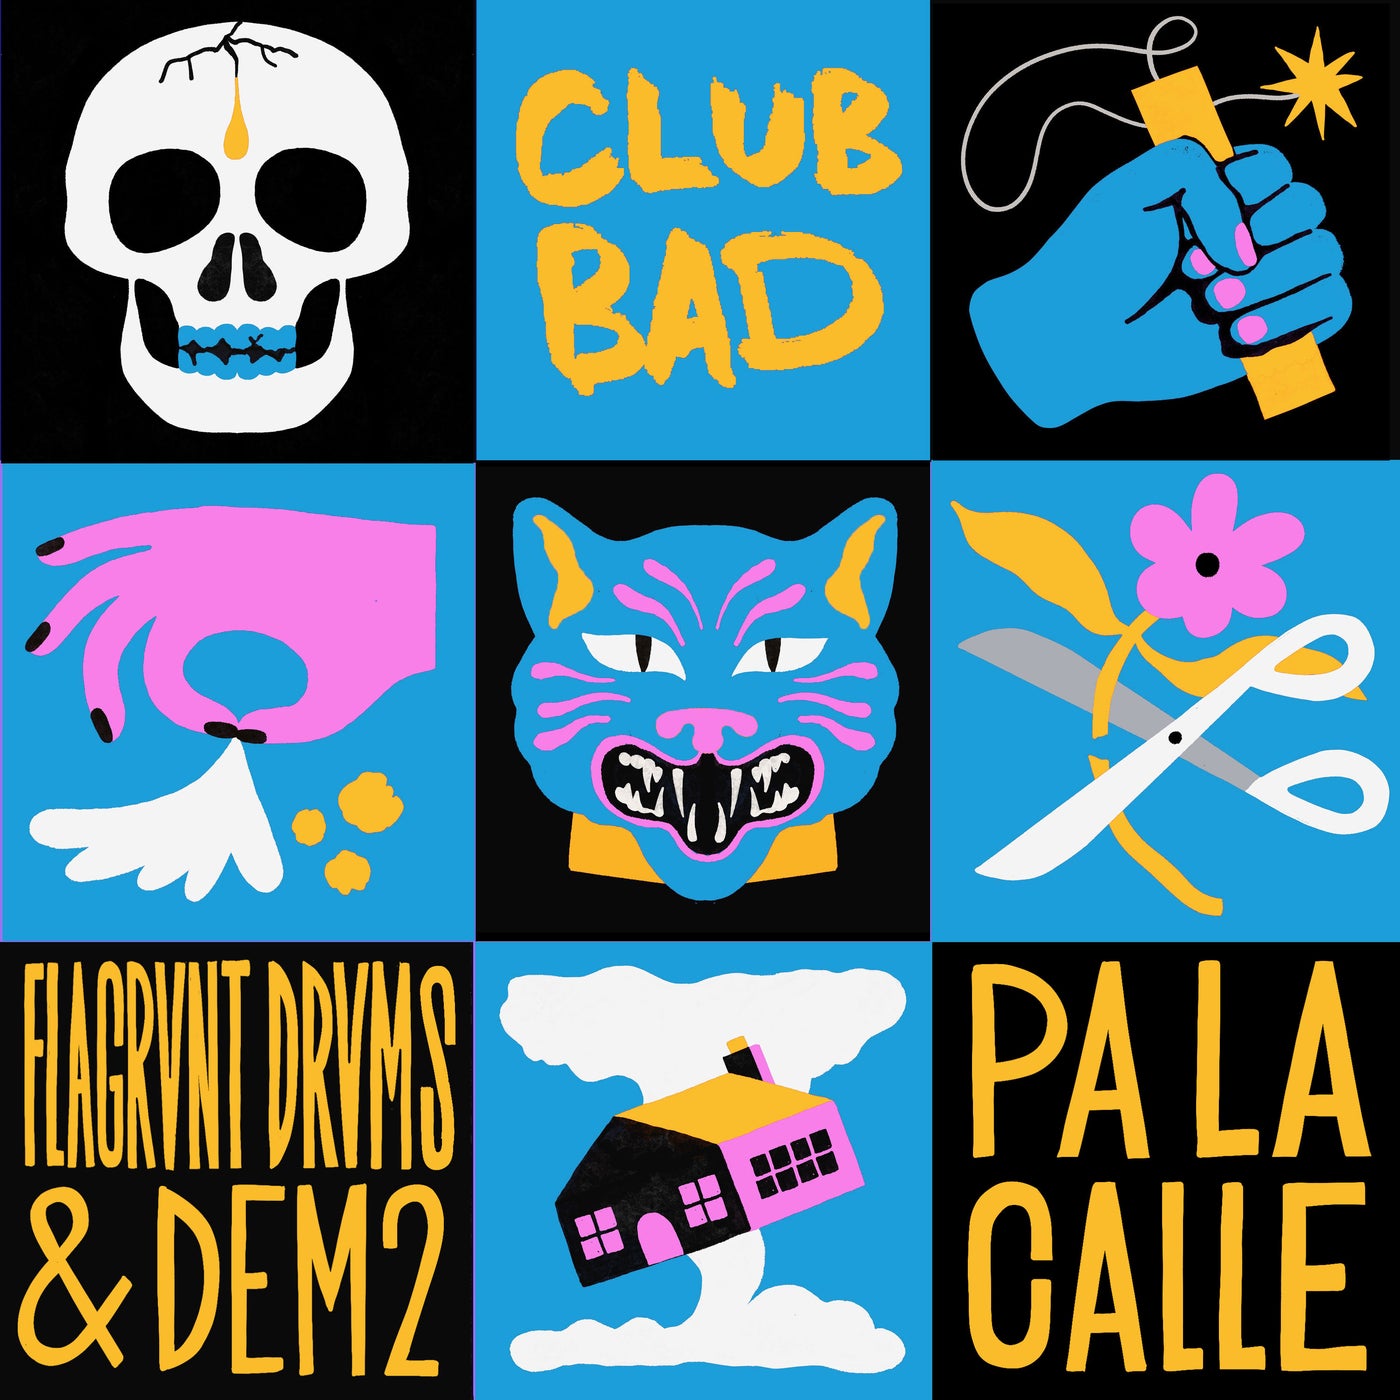 image cover: DEM2, Flagrant Drvms - Pa La Calle on Club Bad